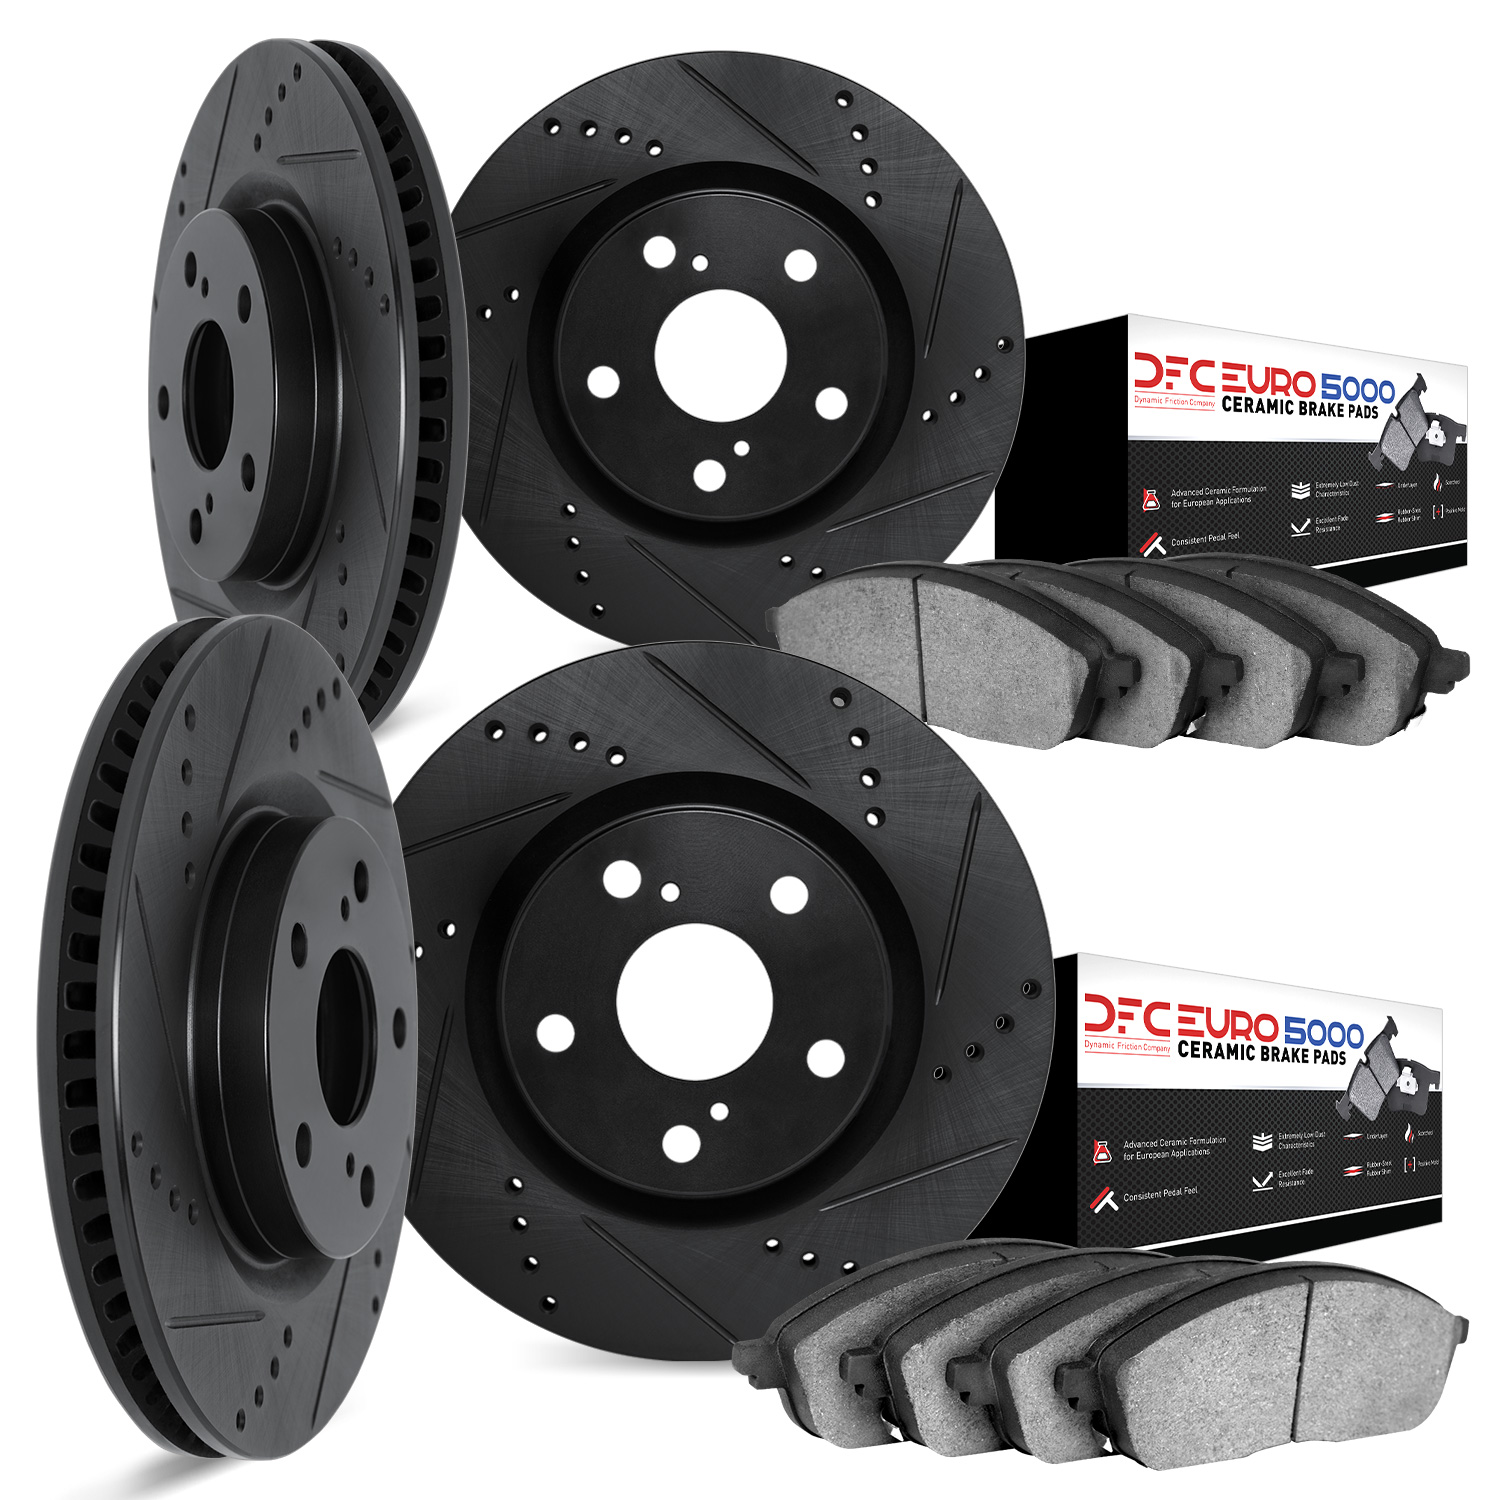 8604-31011 Drilled/Slotted Brake Rotors w/5000 Euro Ceramic Brake Pads Kit [Black], 1991-1993 BMW, Position: Front and Rear